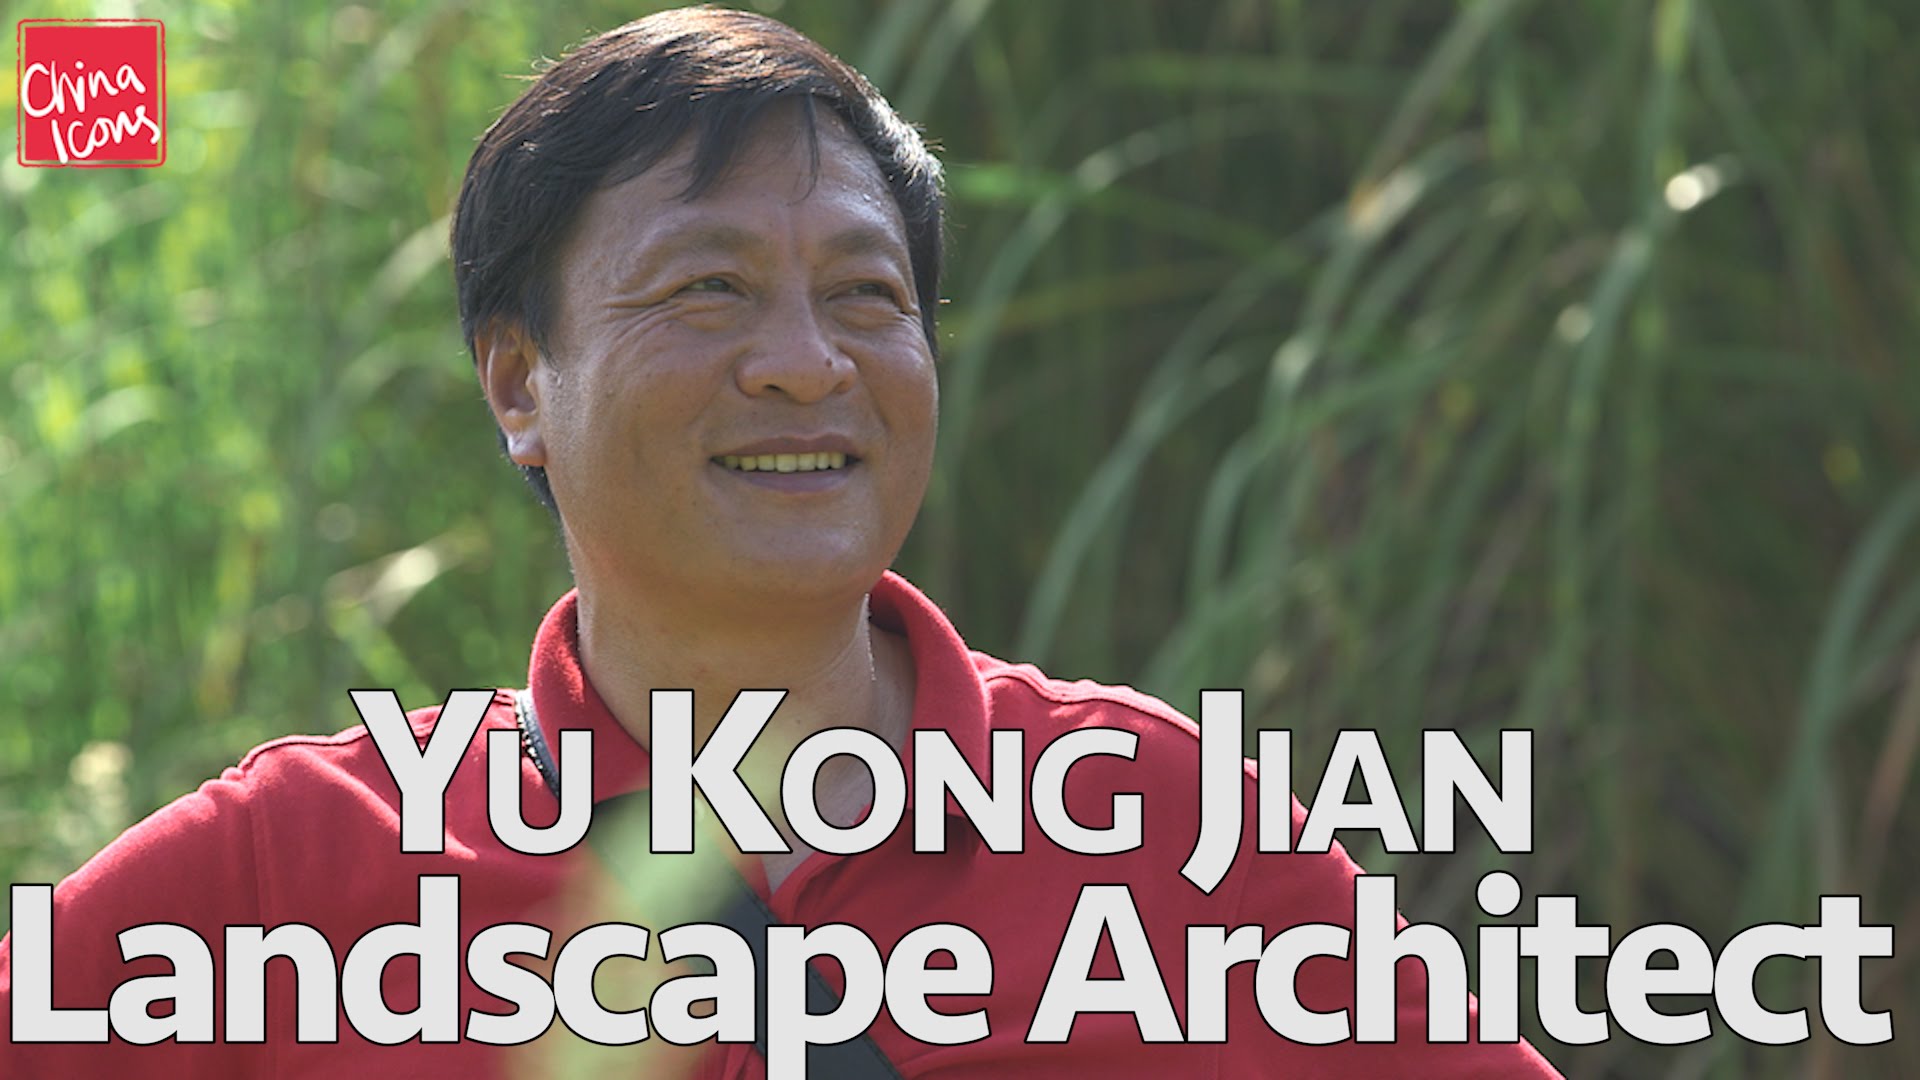 Landscape Architect’s Approach to Tackling Climate Change – Dr Yu Kong Jian | A China Icons Video